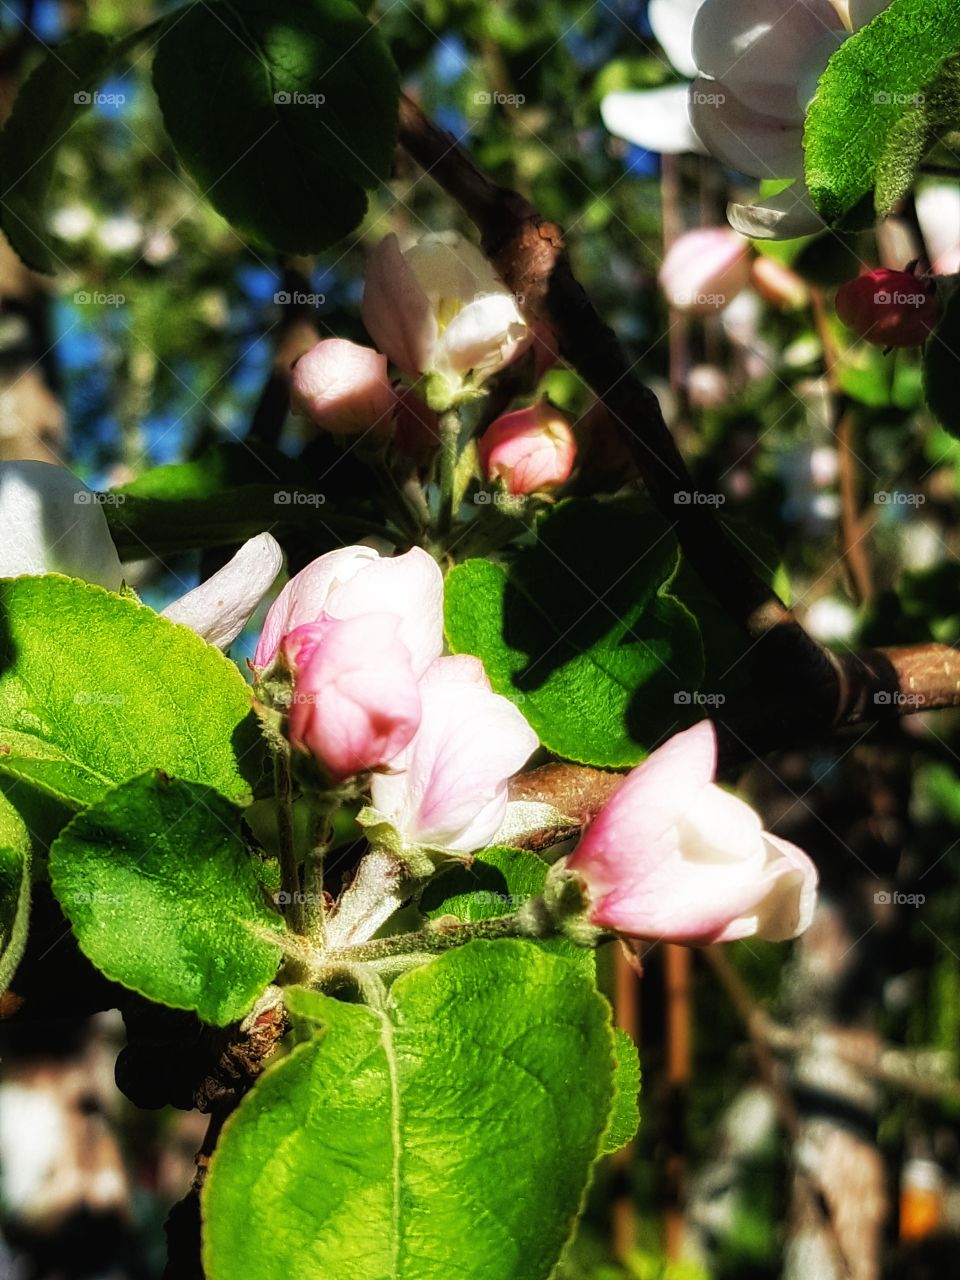 Apple tree in blossom is nature's way to tell you that there's always a new start!